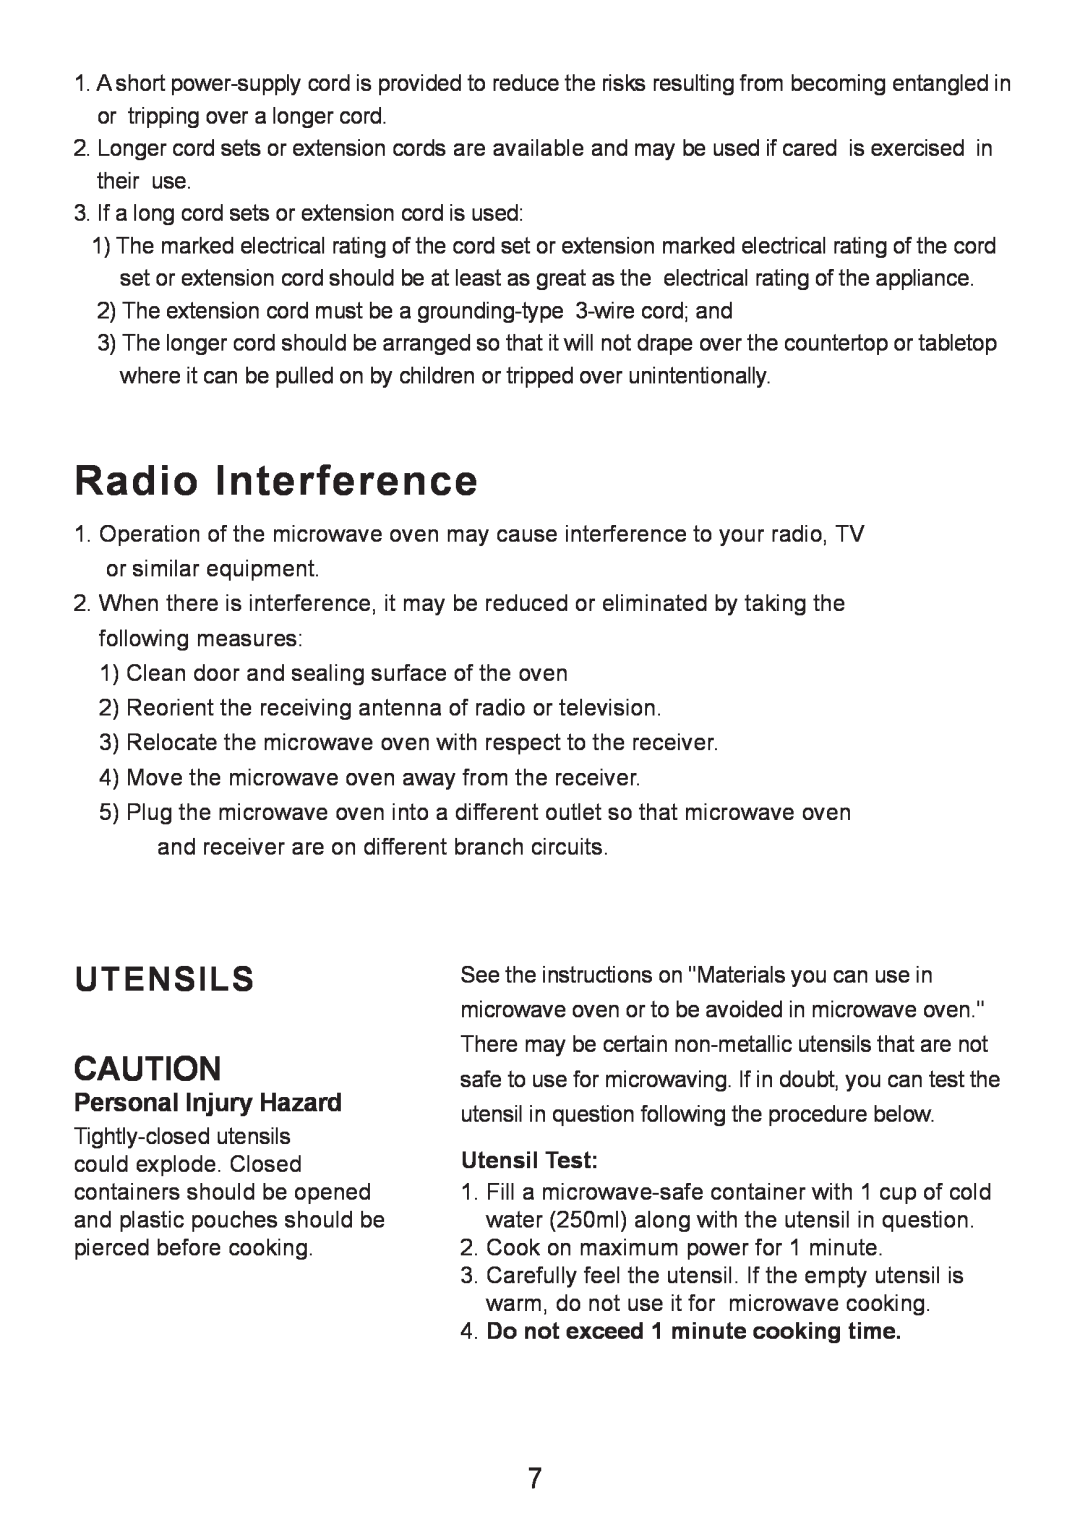 Sanyo EM-S7560W Radio Interference, Utensil Test, Do not exceed 1 minute cooking time, Utensils, Personal Injury Hazard 